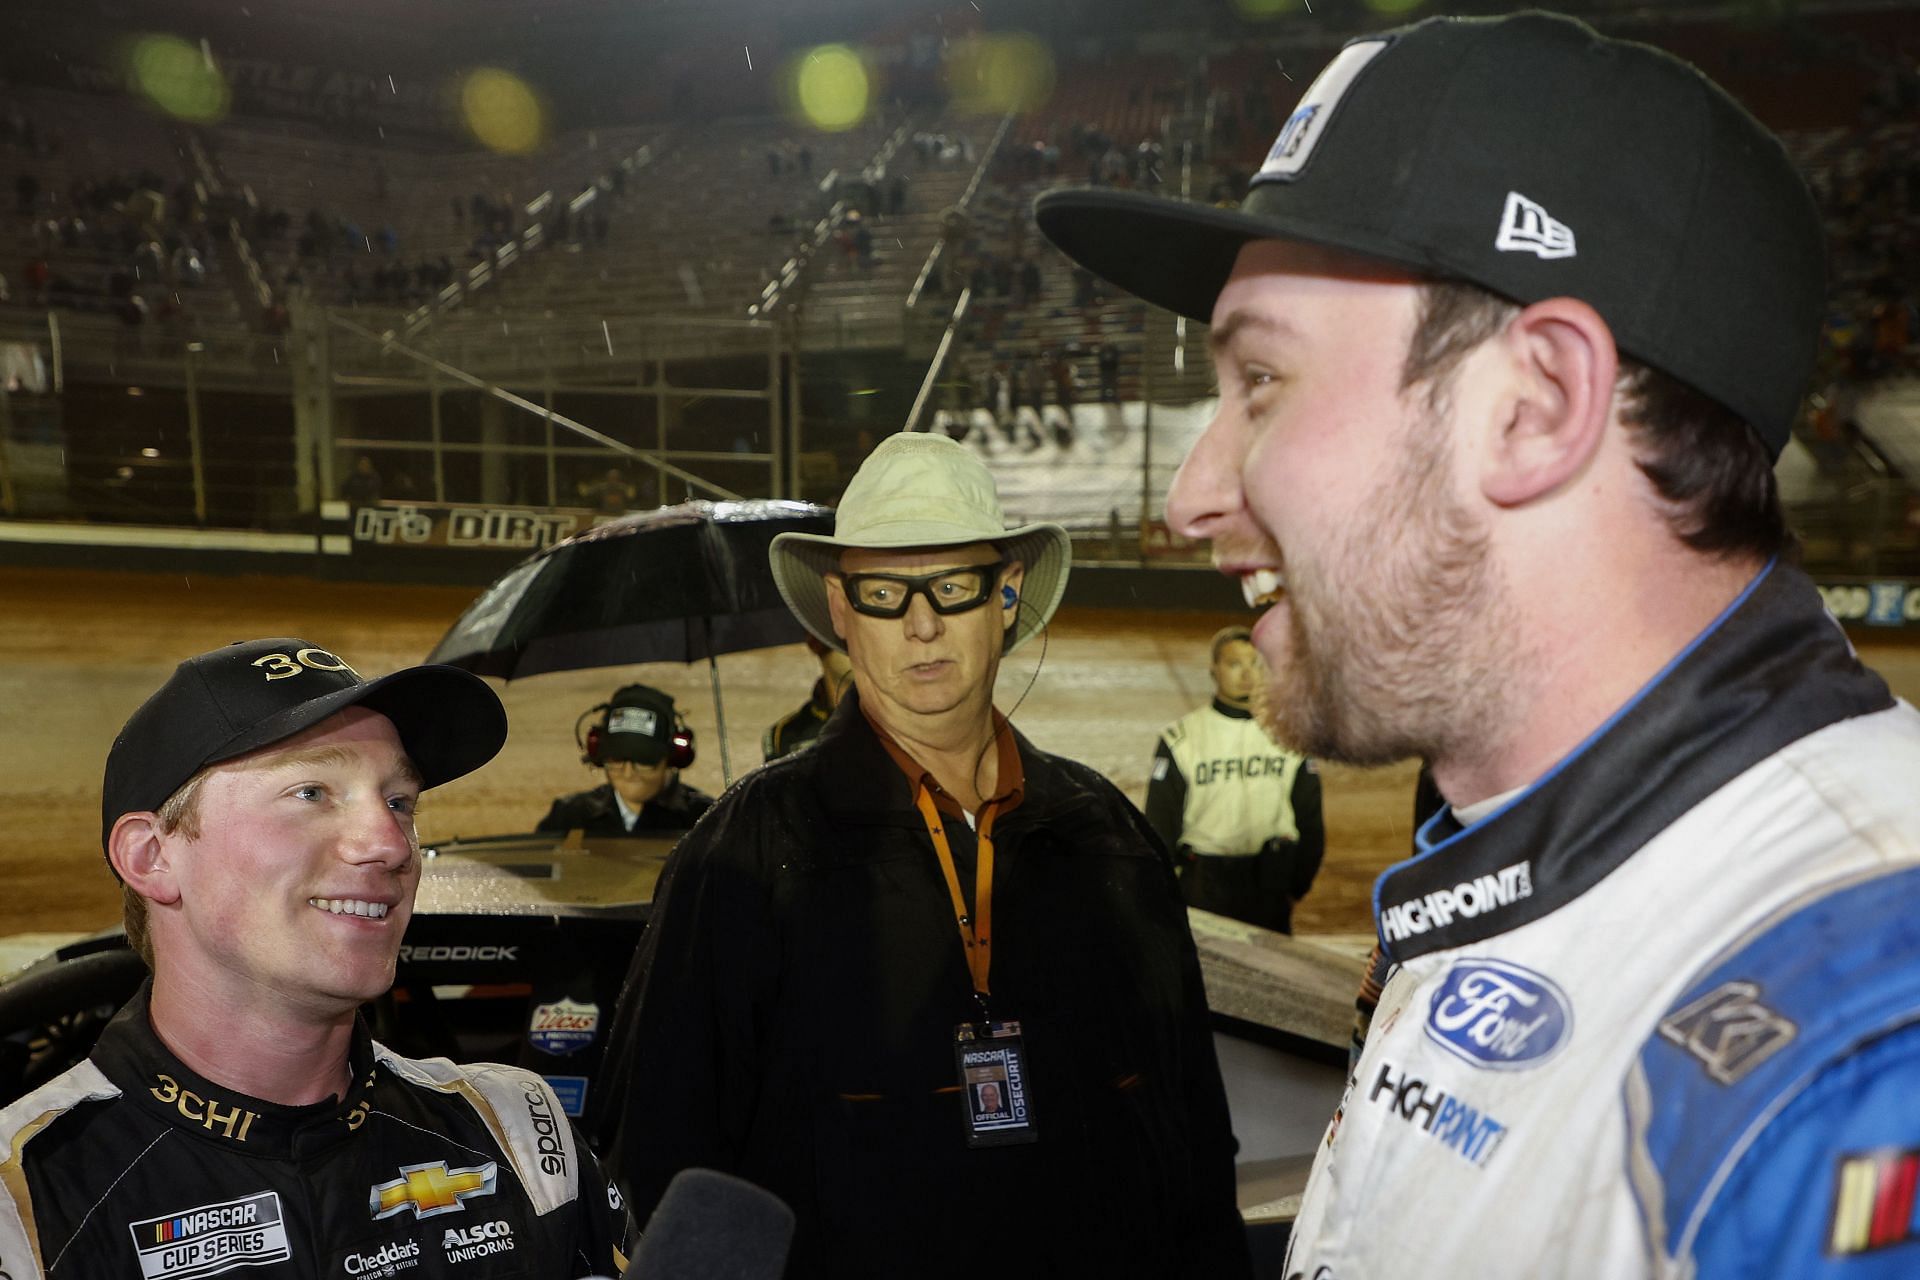 Tyler Reddick and Chase Briscoe talk after an on-track incident during the 2022 NASCAR Cup Series Food City Dirt Race at Bristol Motor Speedway in Tennessee. (Photo by Chris Graythen/Getty Images)